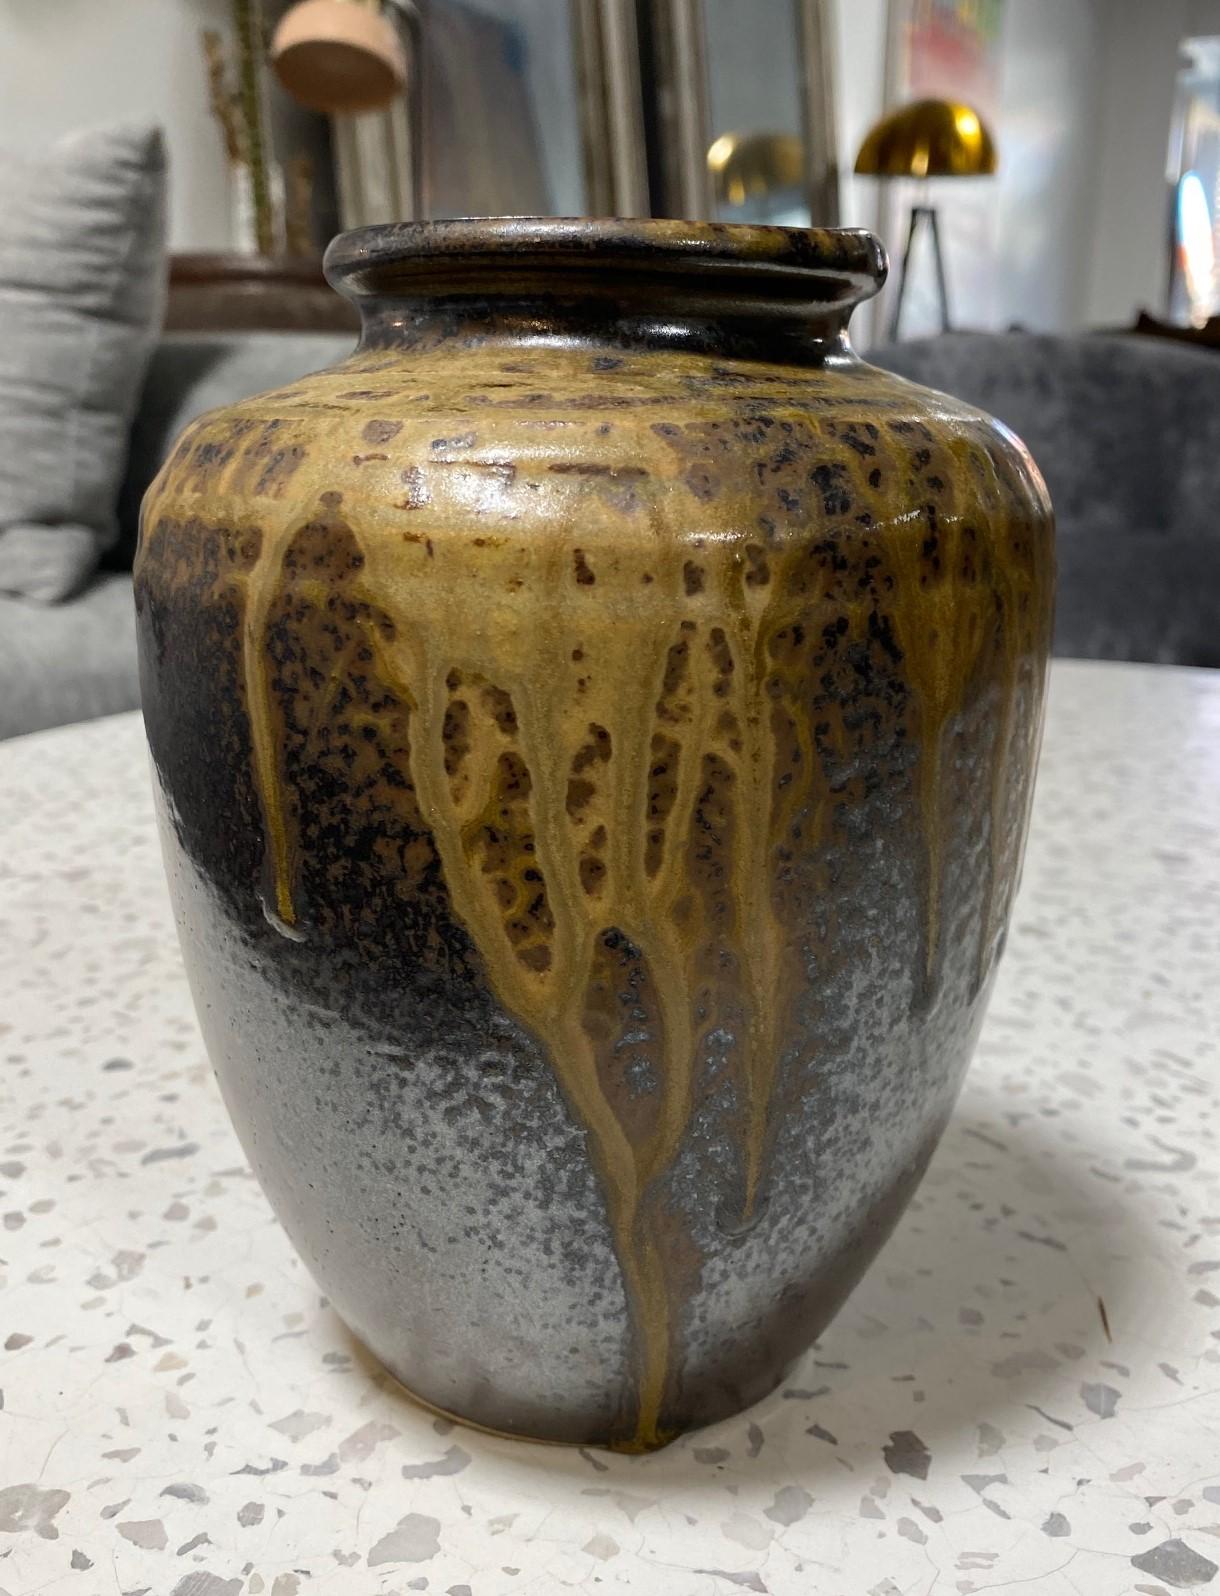 A wonderfully shaped gorgeously glazed Tamba (sometimes spelled Tanba) Ware pottery vase/ jar featuring a natural, organic ash glaze that absolutely radiates in the light. This unique glaze pattern happens by chance in the kiln. Aesthetically